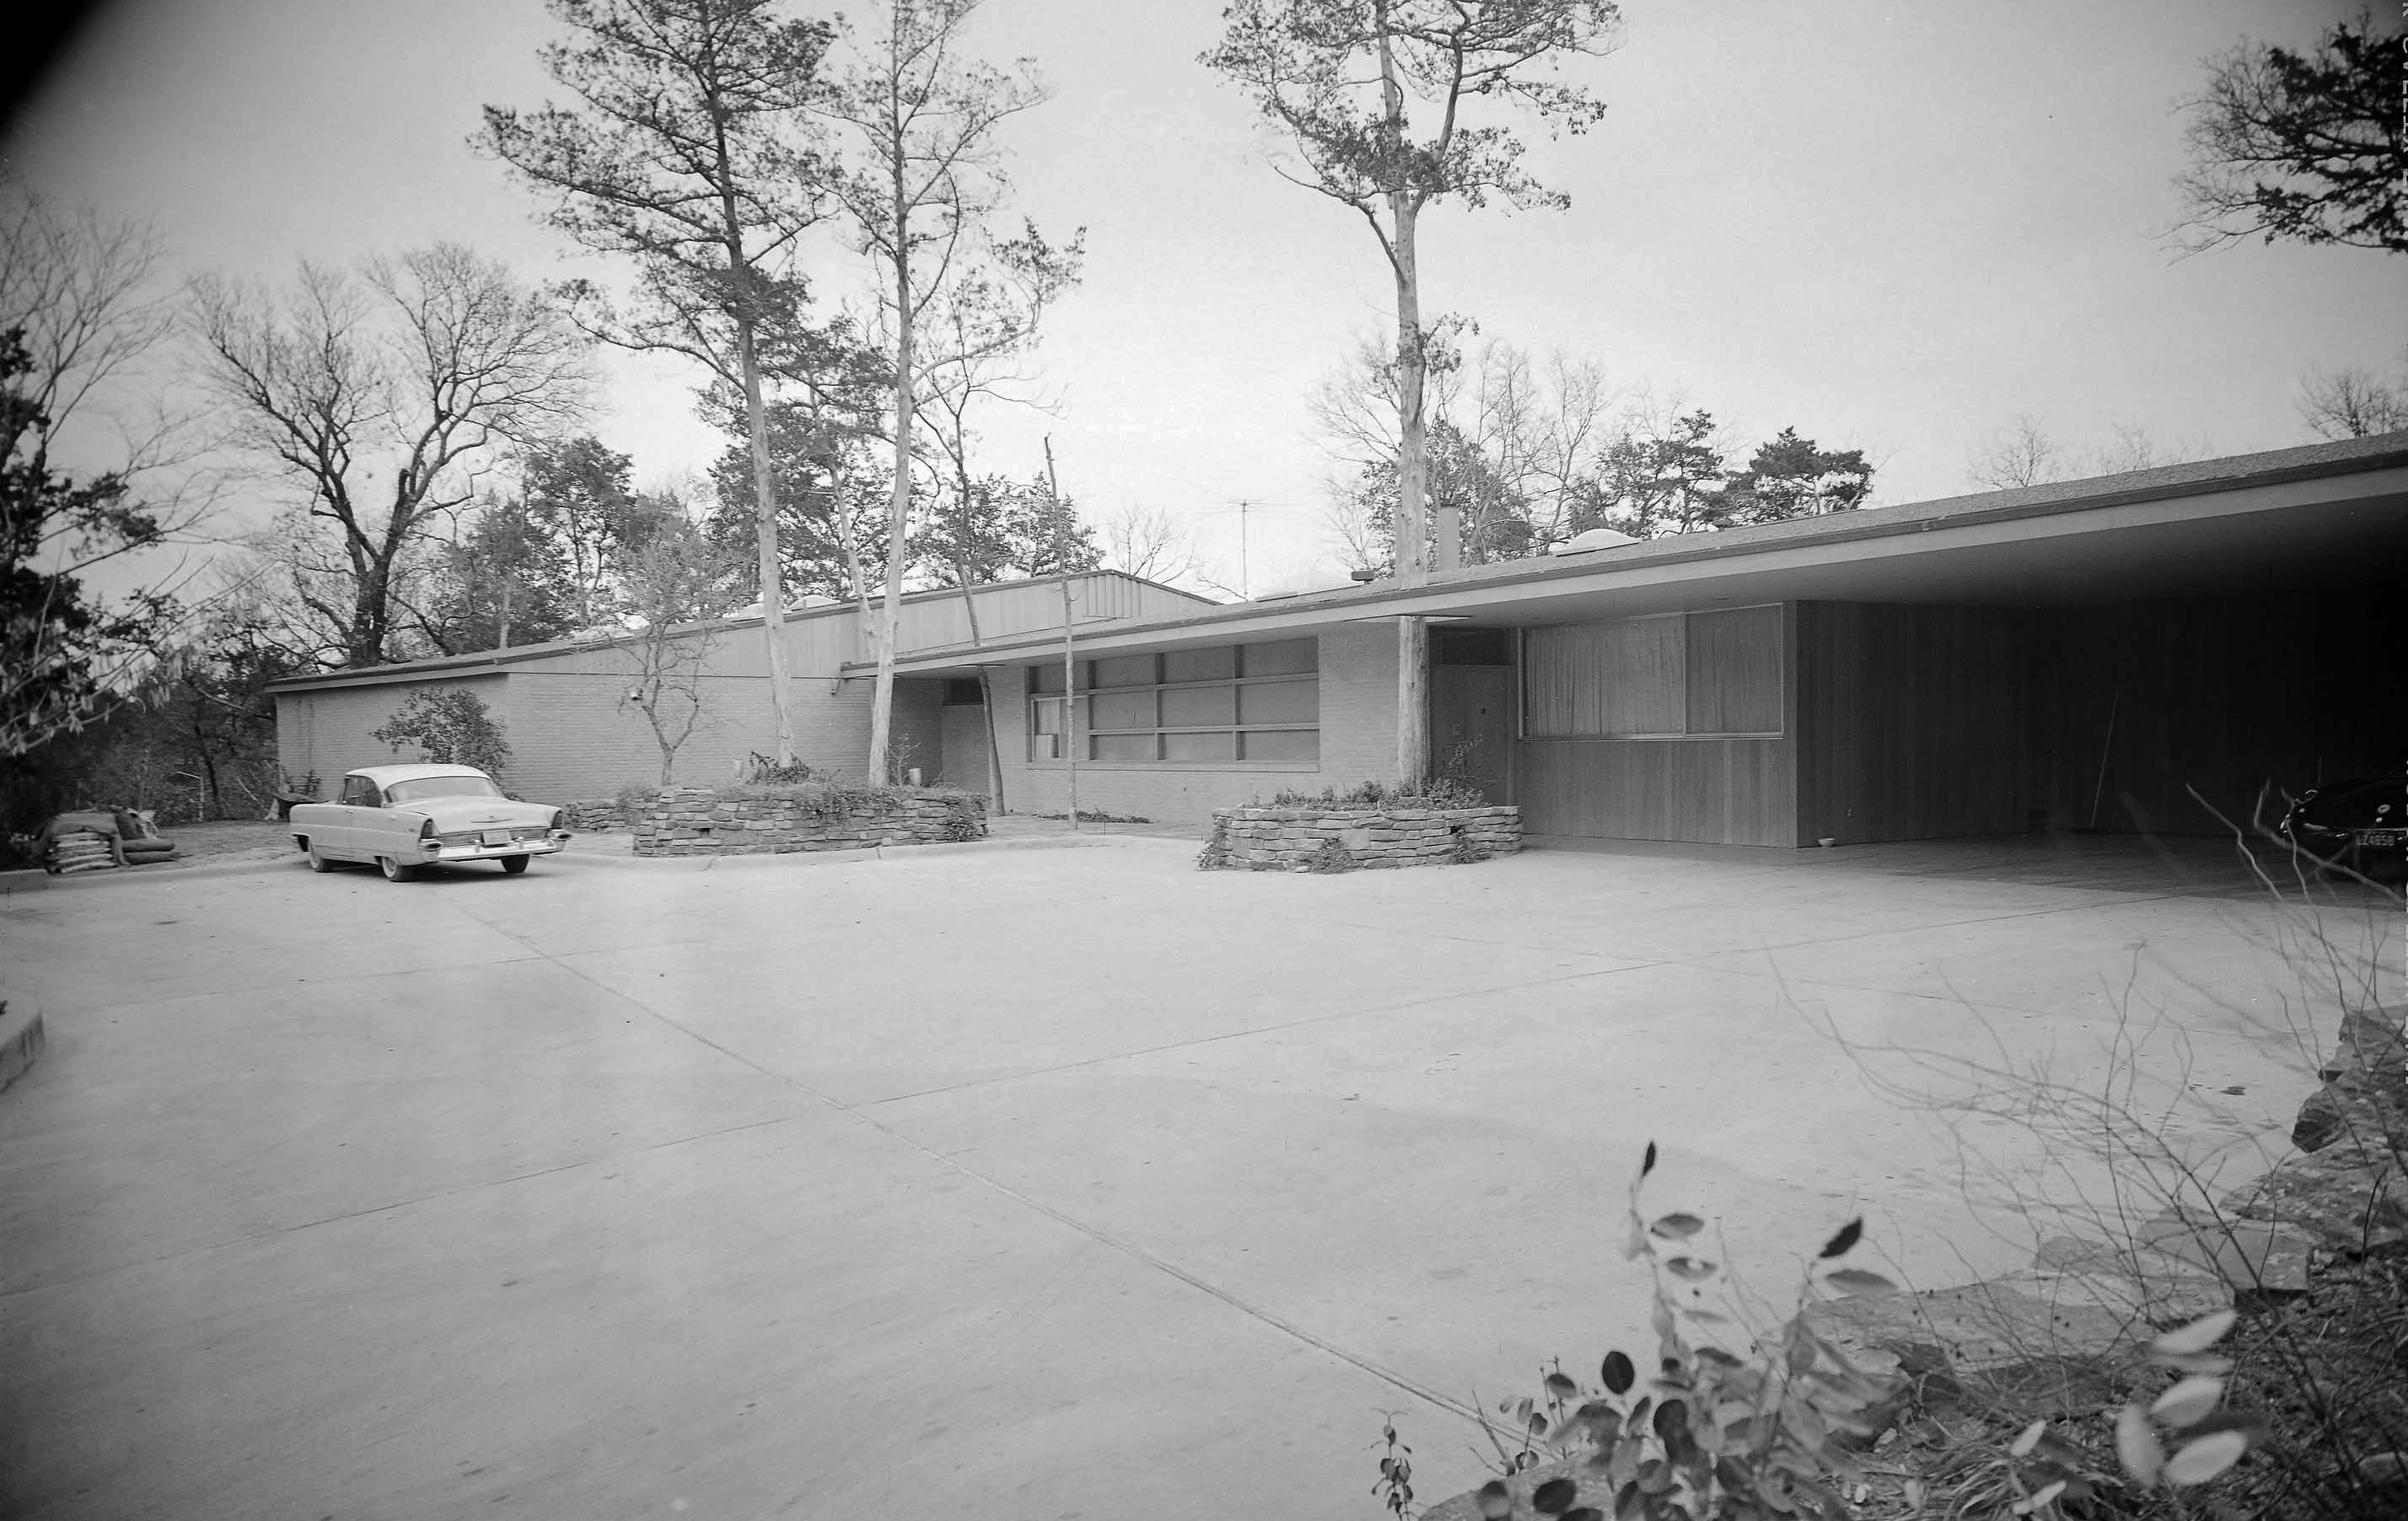 1956. "Hayes residence, Kessler Lake Drive, Dallas. Driveway to front door. Architects: Prinz & Brooks." Another look at Chevrolet dealer Earl Hayes' rambling ranch, with a Lincoln Premiere decorating the drive. Photo by Maynard L. Parker for House Beautiful. Source: Huntington Library. View full size.